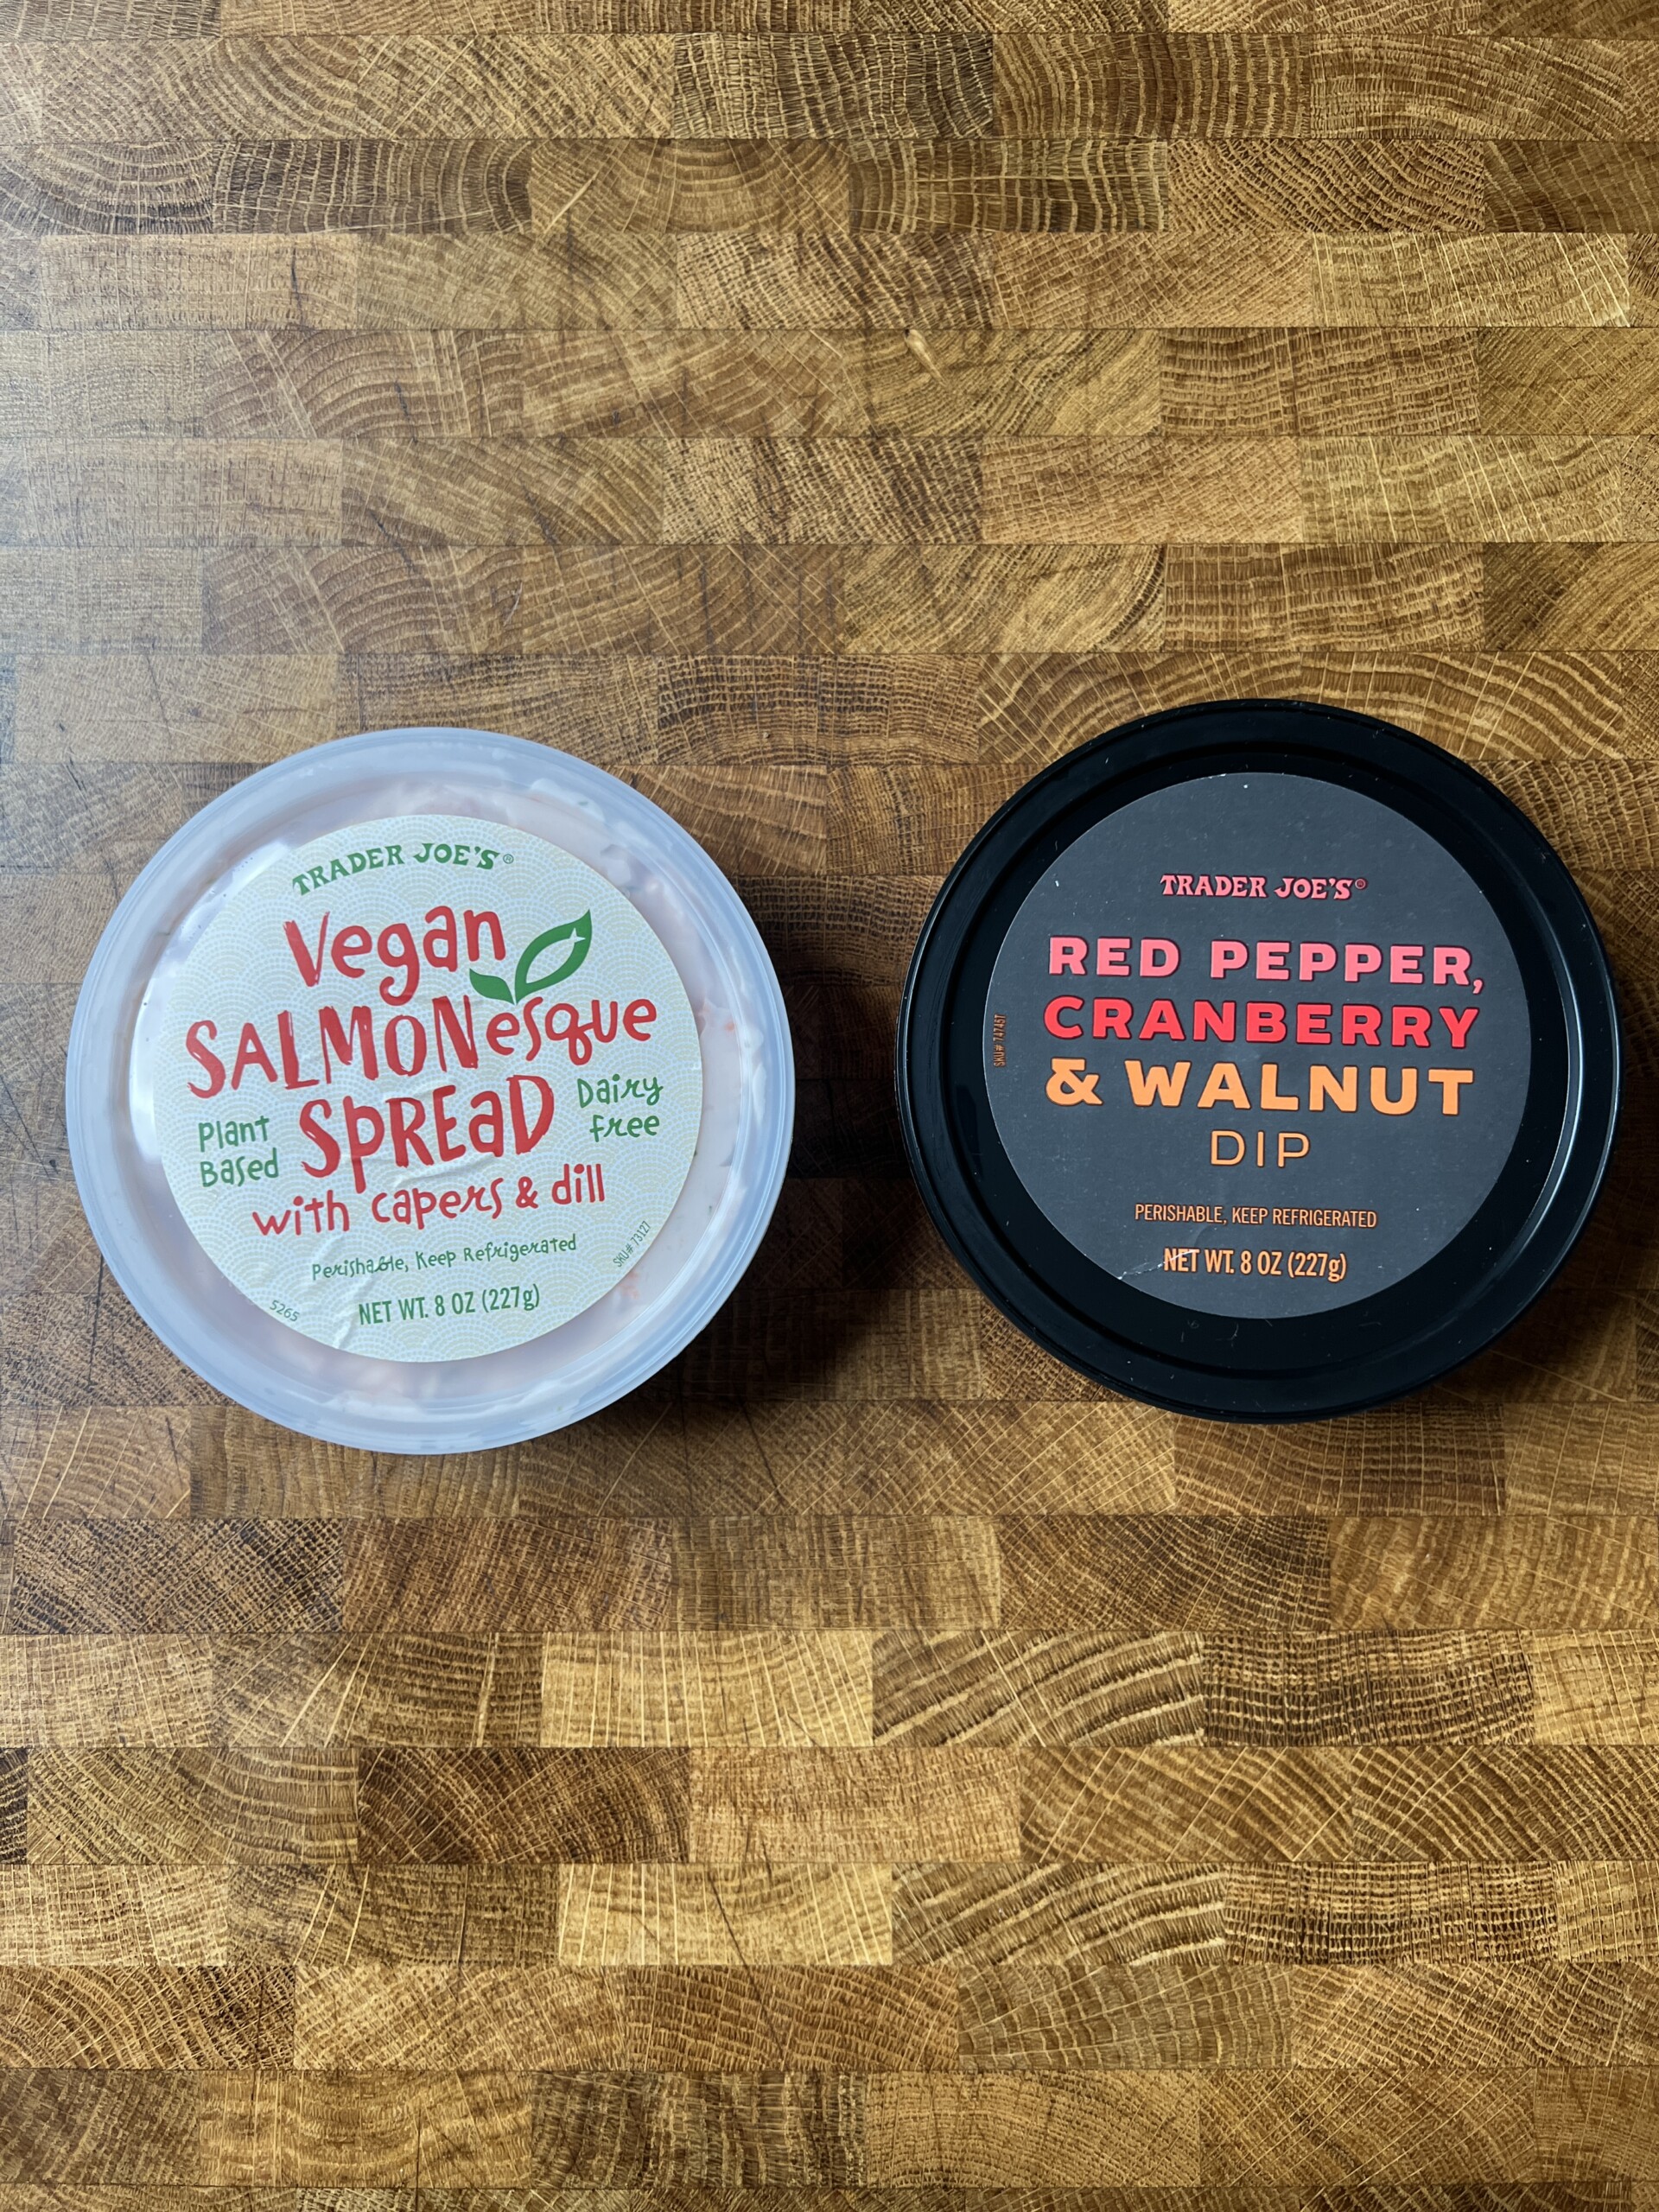 A container of Trader Joe’s Vegan Salmonesque Spread and Trader Joe\'s red pepper, cranberry & walnut dip.